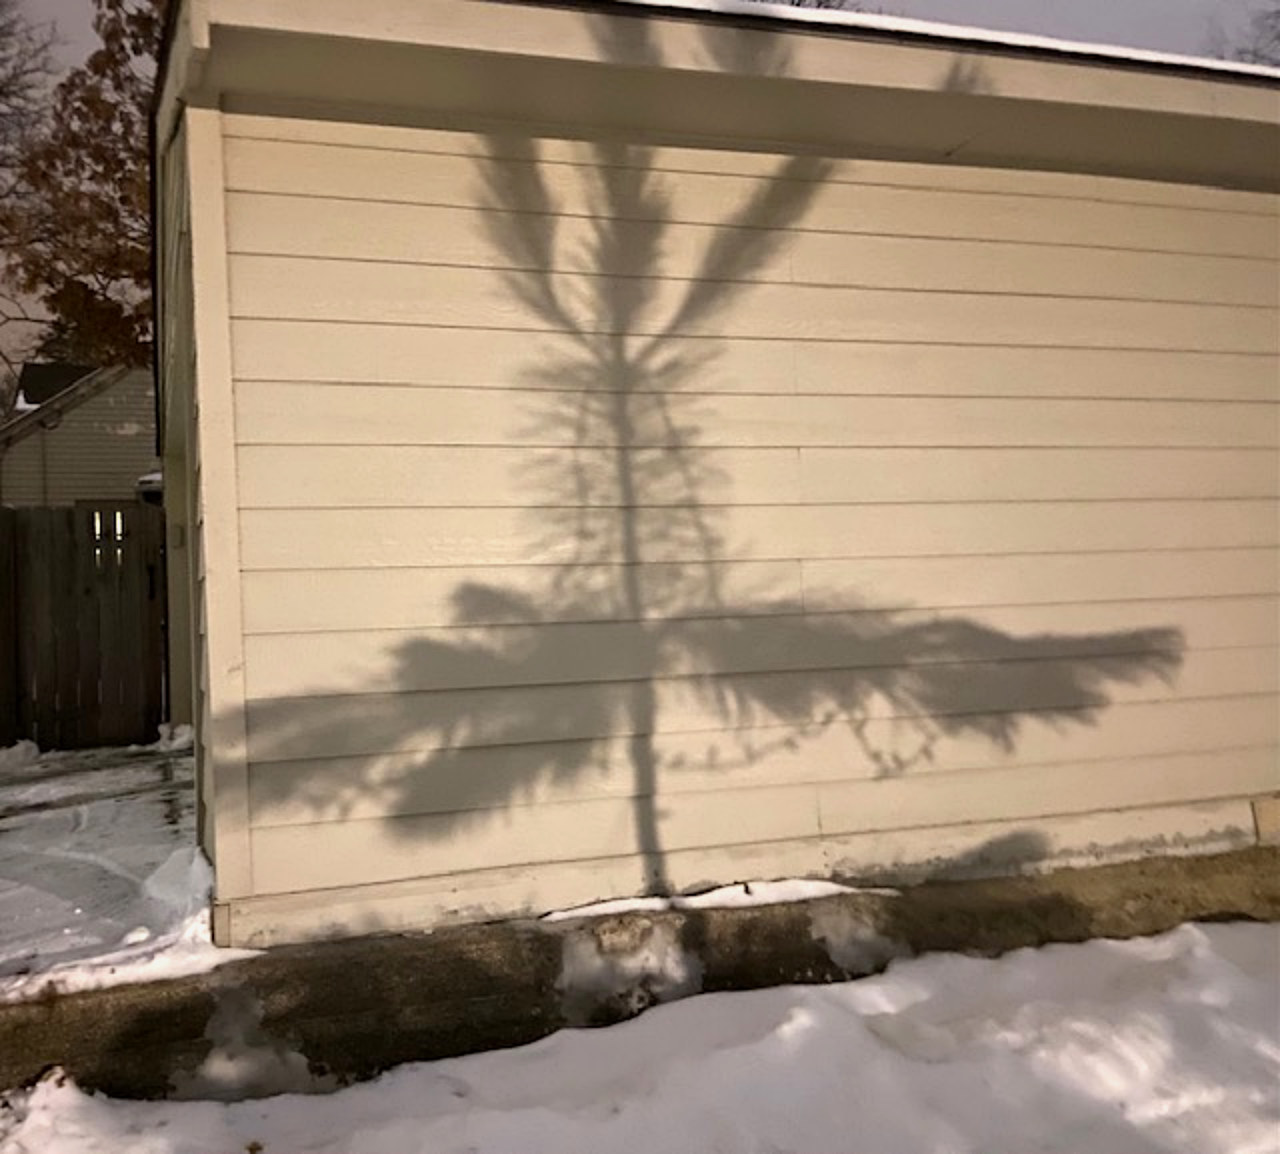 shadow of evergreen tree branch on cream-colored clapboard garage wall hit by sunlight